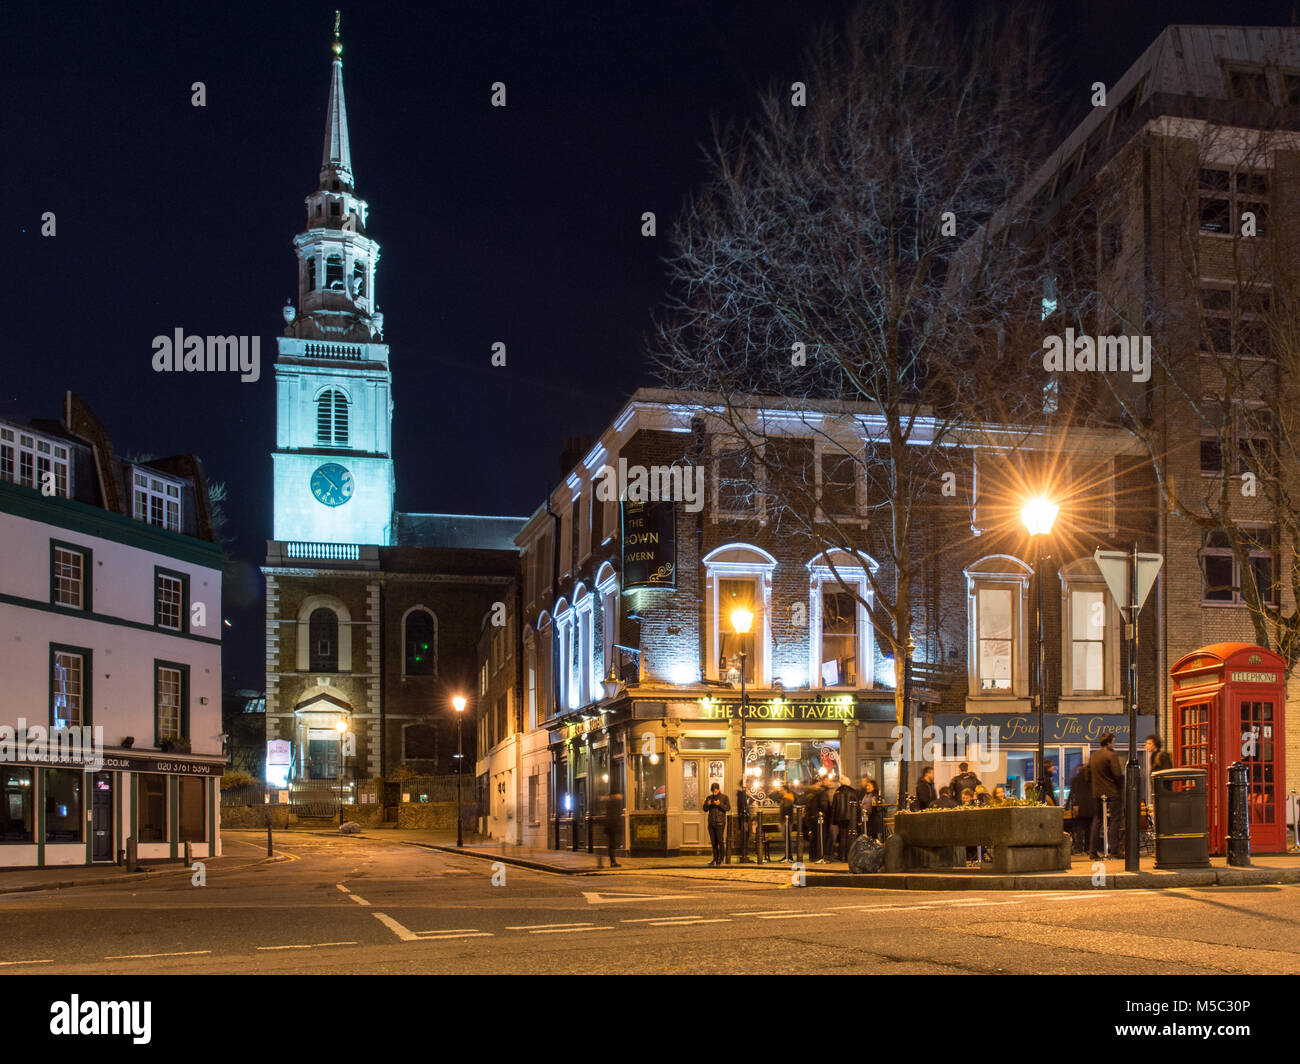 London, England, UK - February 9, 2018: The spire of St James's Church is lit up at night on Clerkenwell Green in central London. Stock Photo